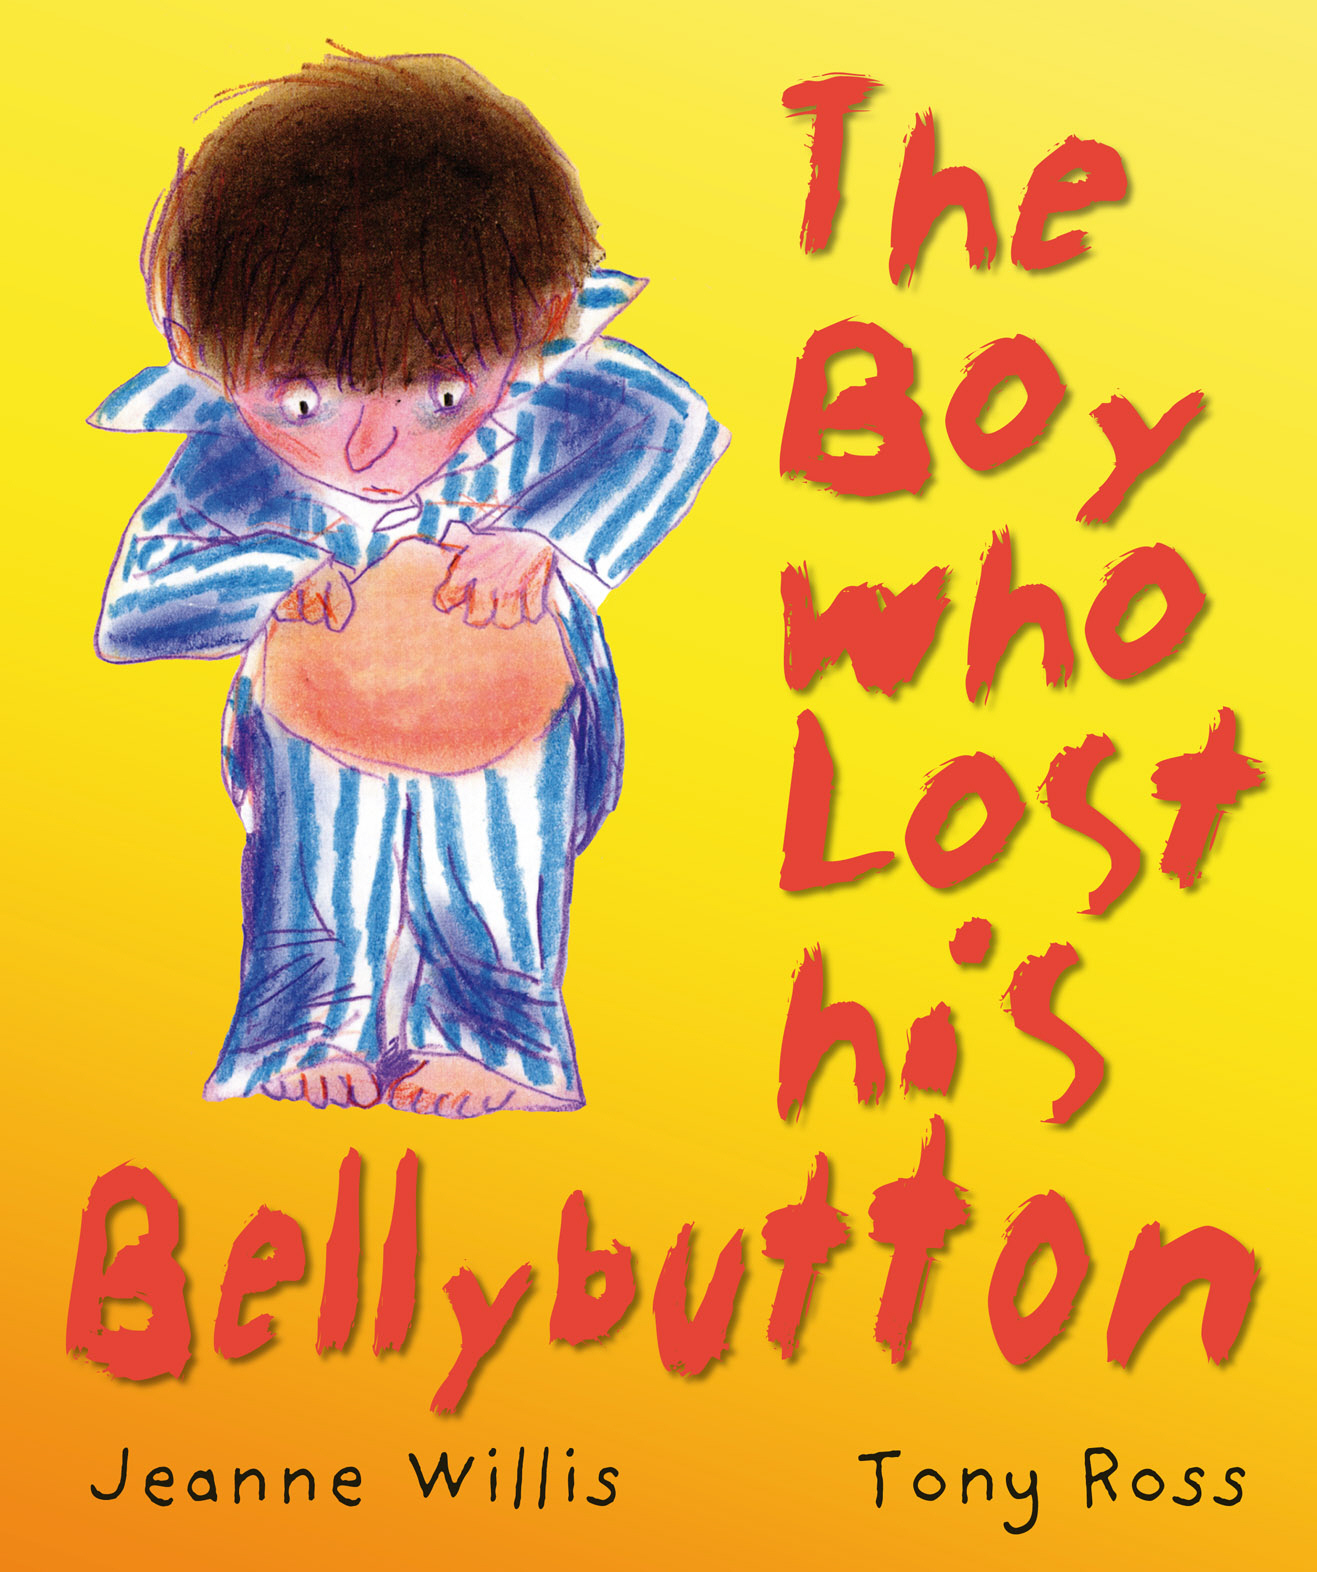 The Boy Who Lost His Bellybutton